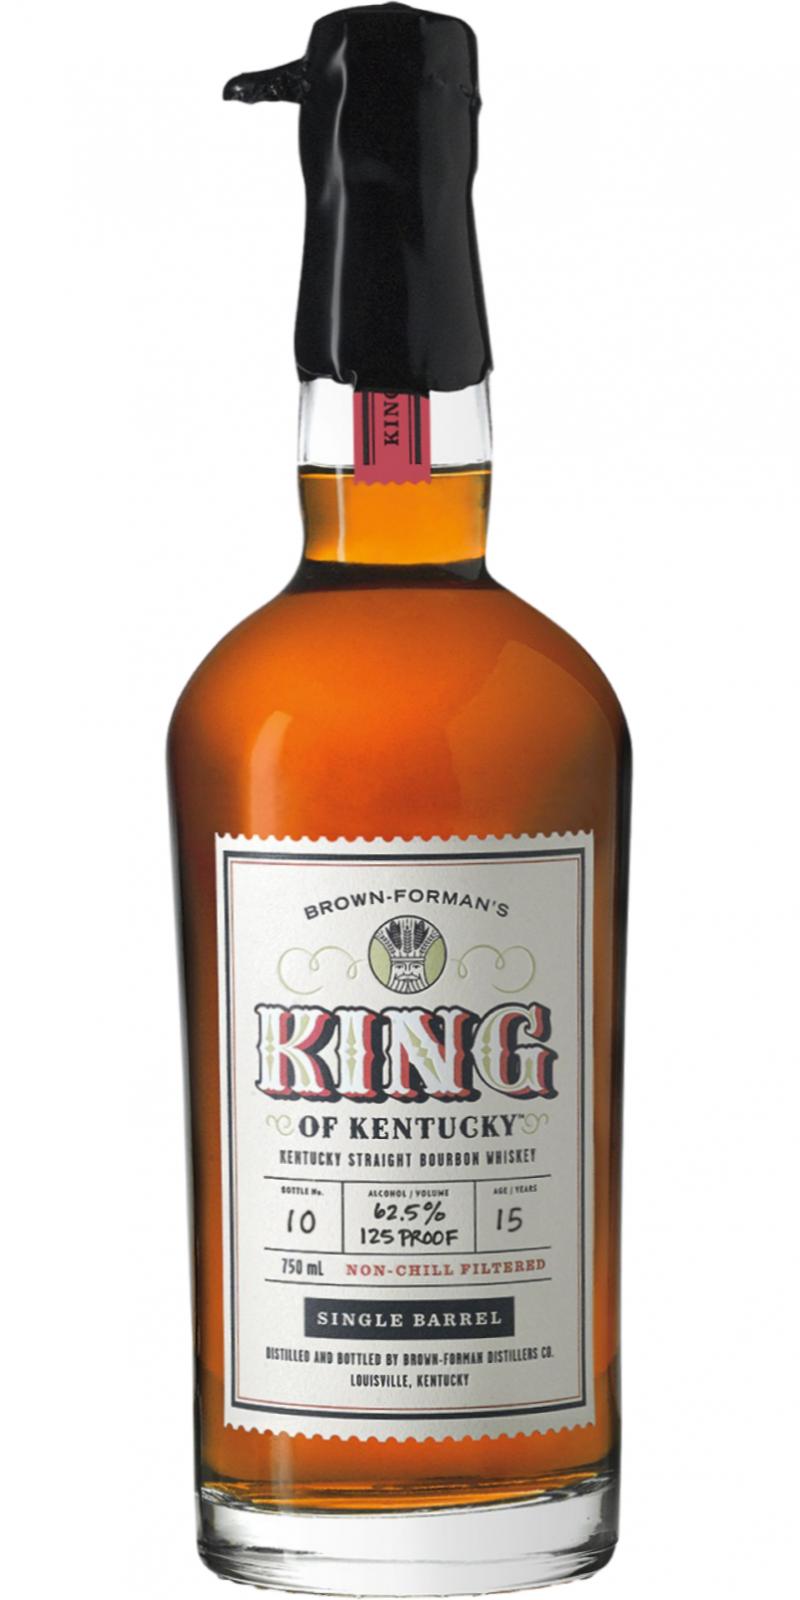 King of Kentucky Whiskybase Ratings and reviews for whisky